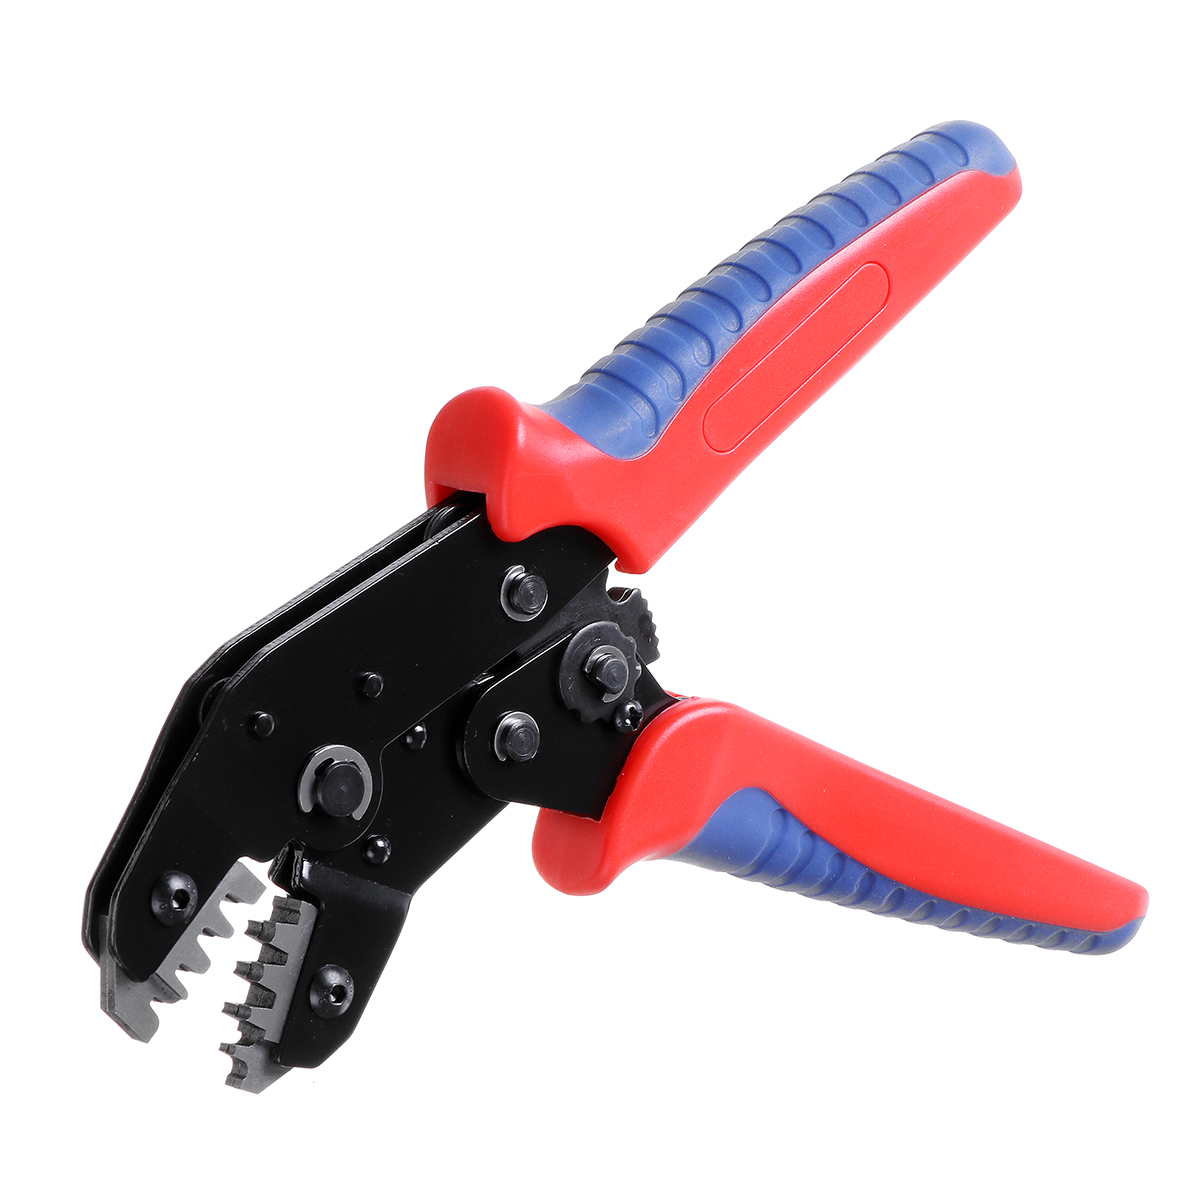 Multifunctional-Cold-Terminal-Crimping-Pliers-Cable-Electrician-Tools-1803706-3